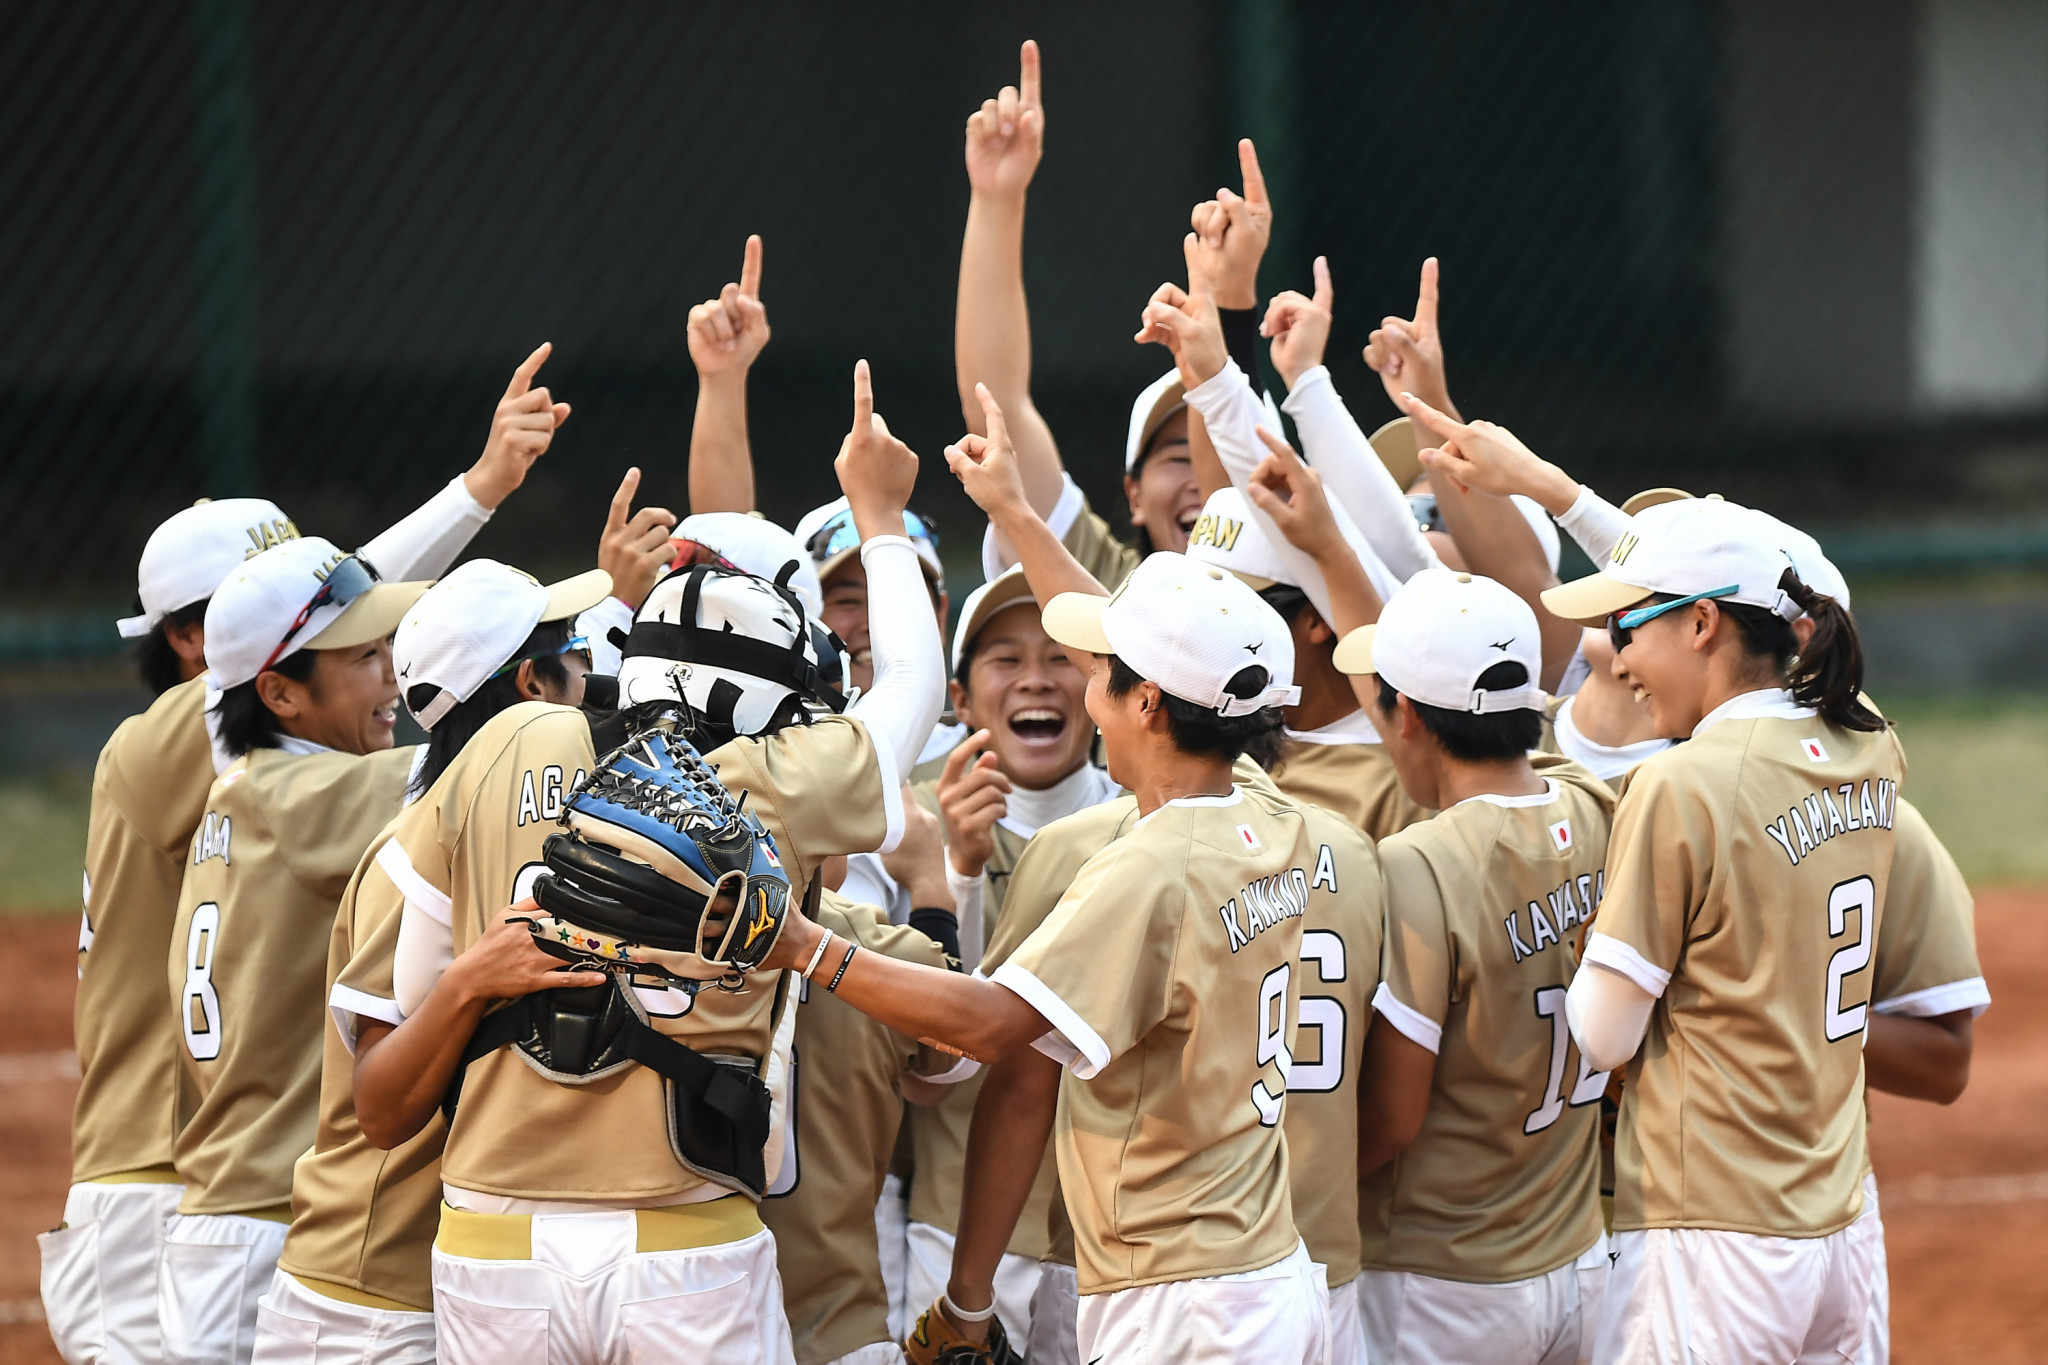 Record nine nations confirmed for Asian Games softball event at Hangzhou 2022